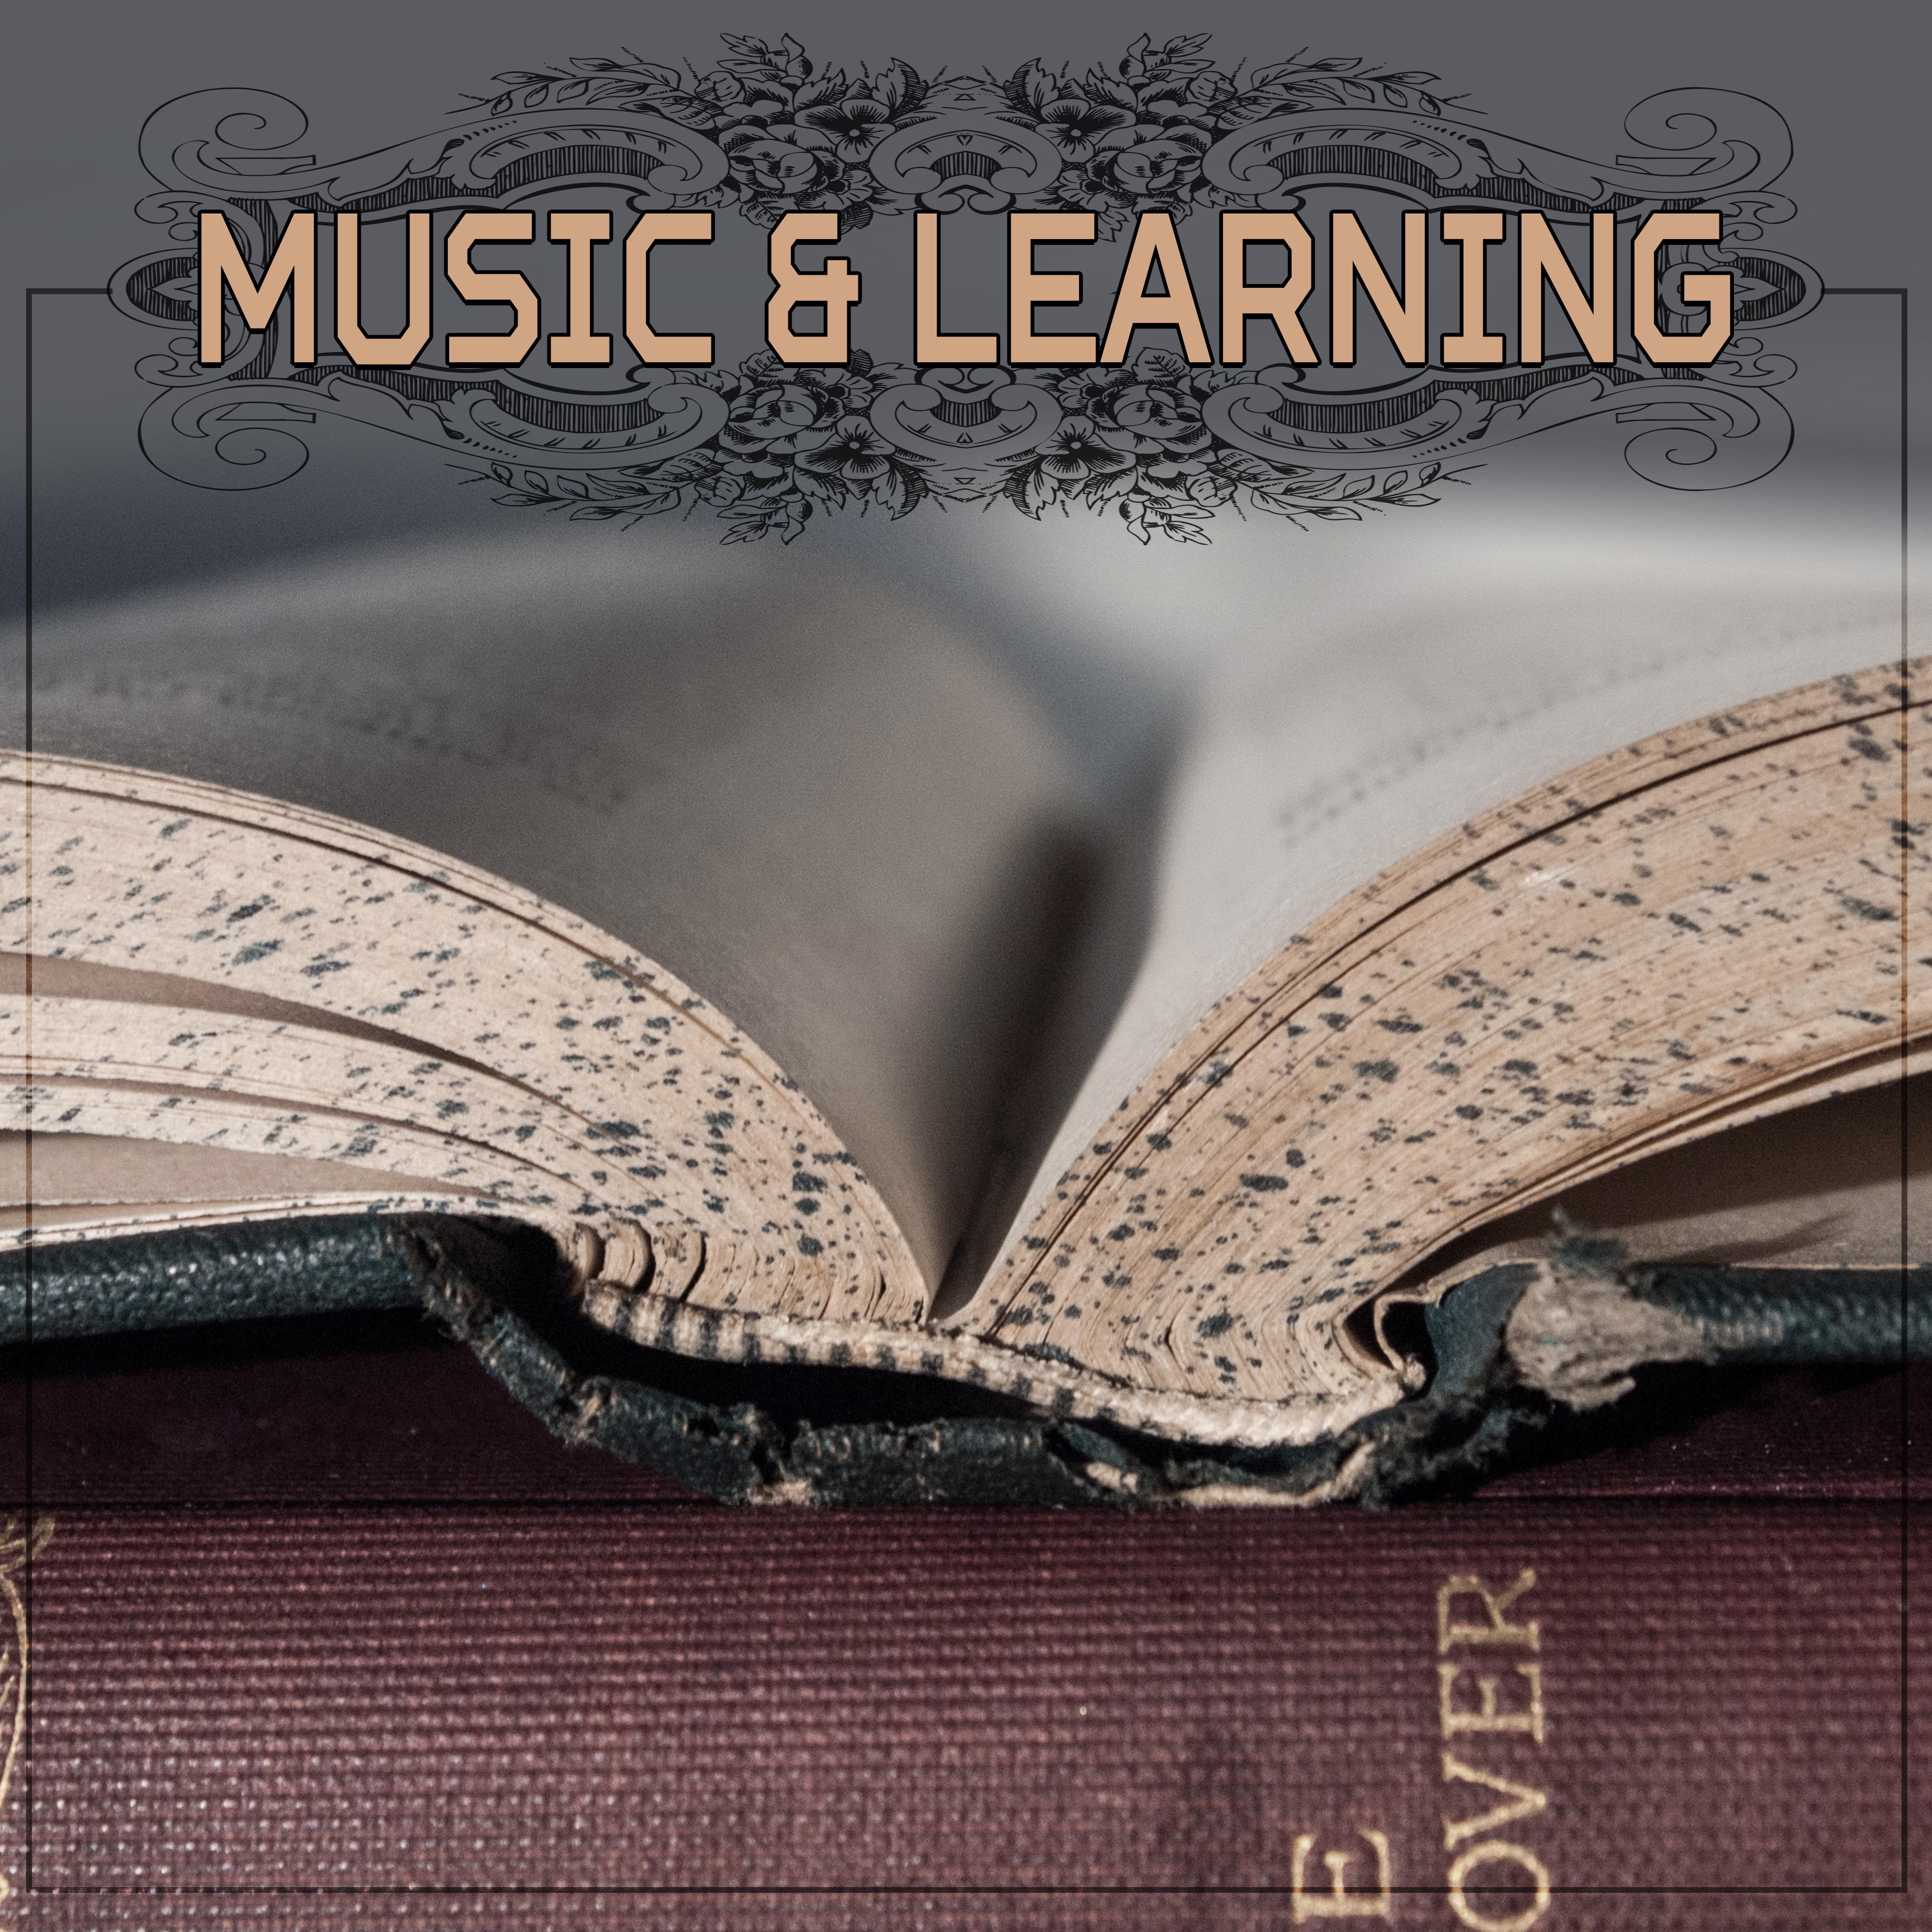 Music  Learning  Best Classical Music for Study, Stress Free, Better Memory, Focus with Composers